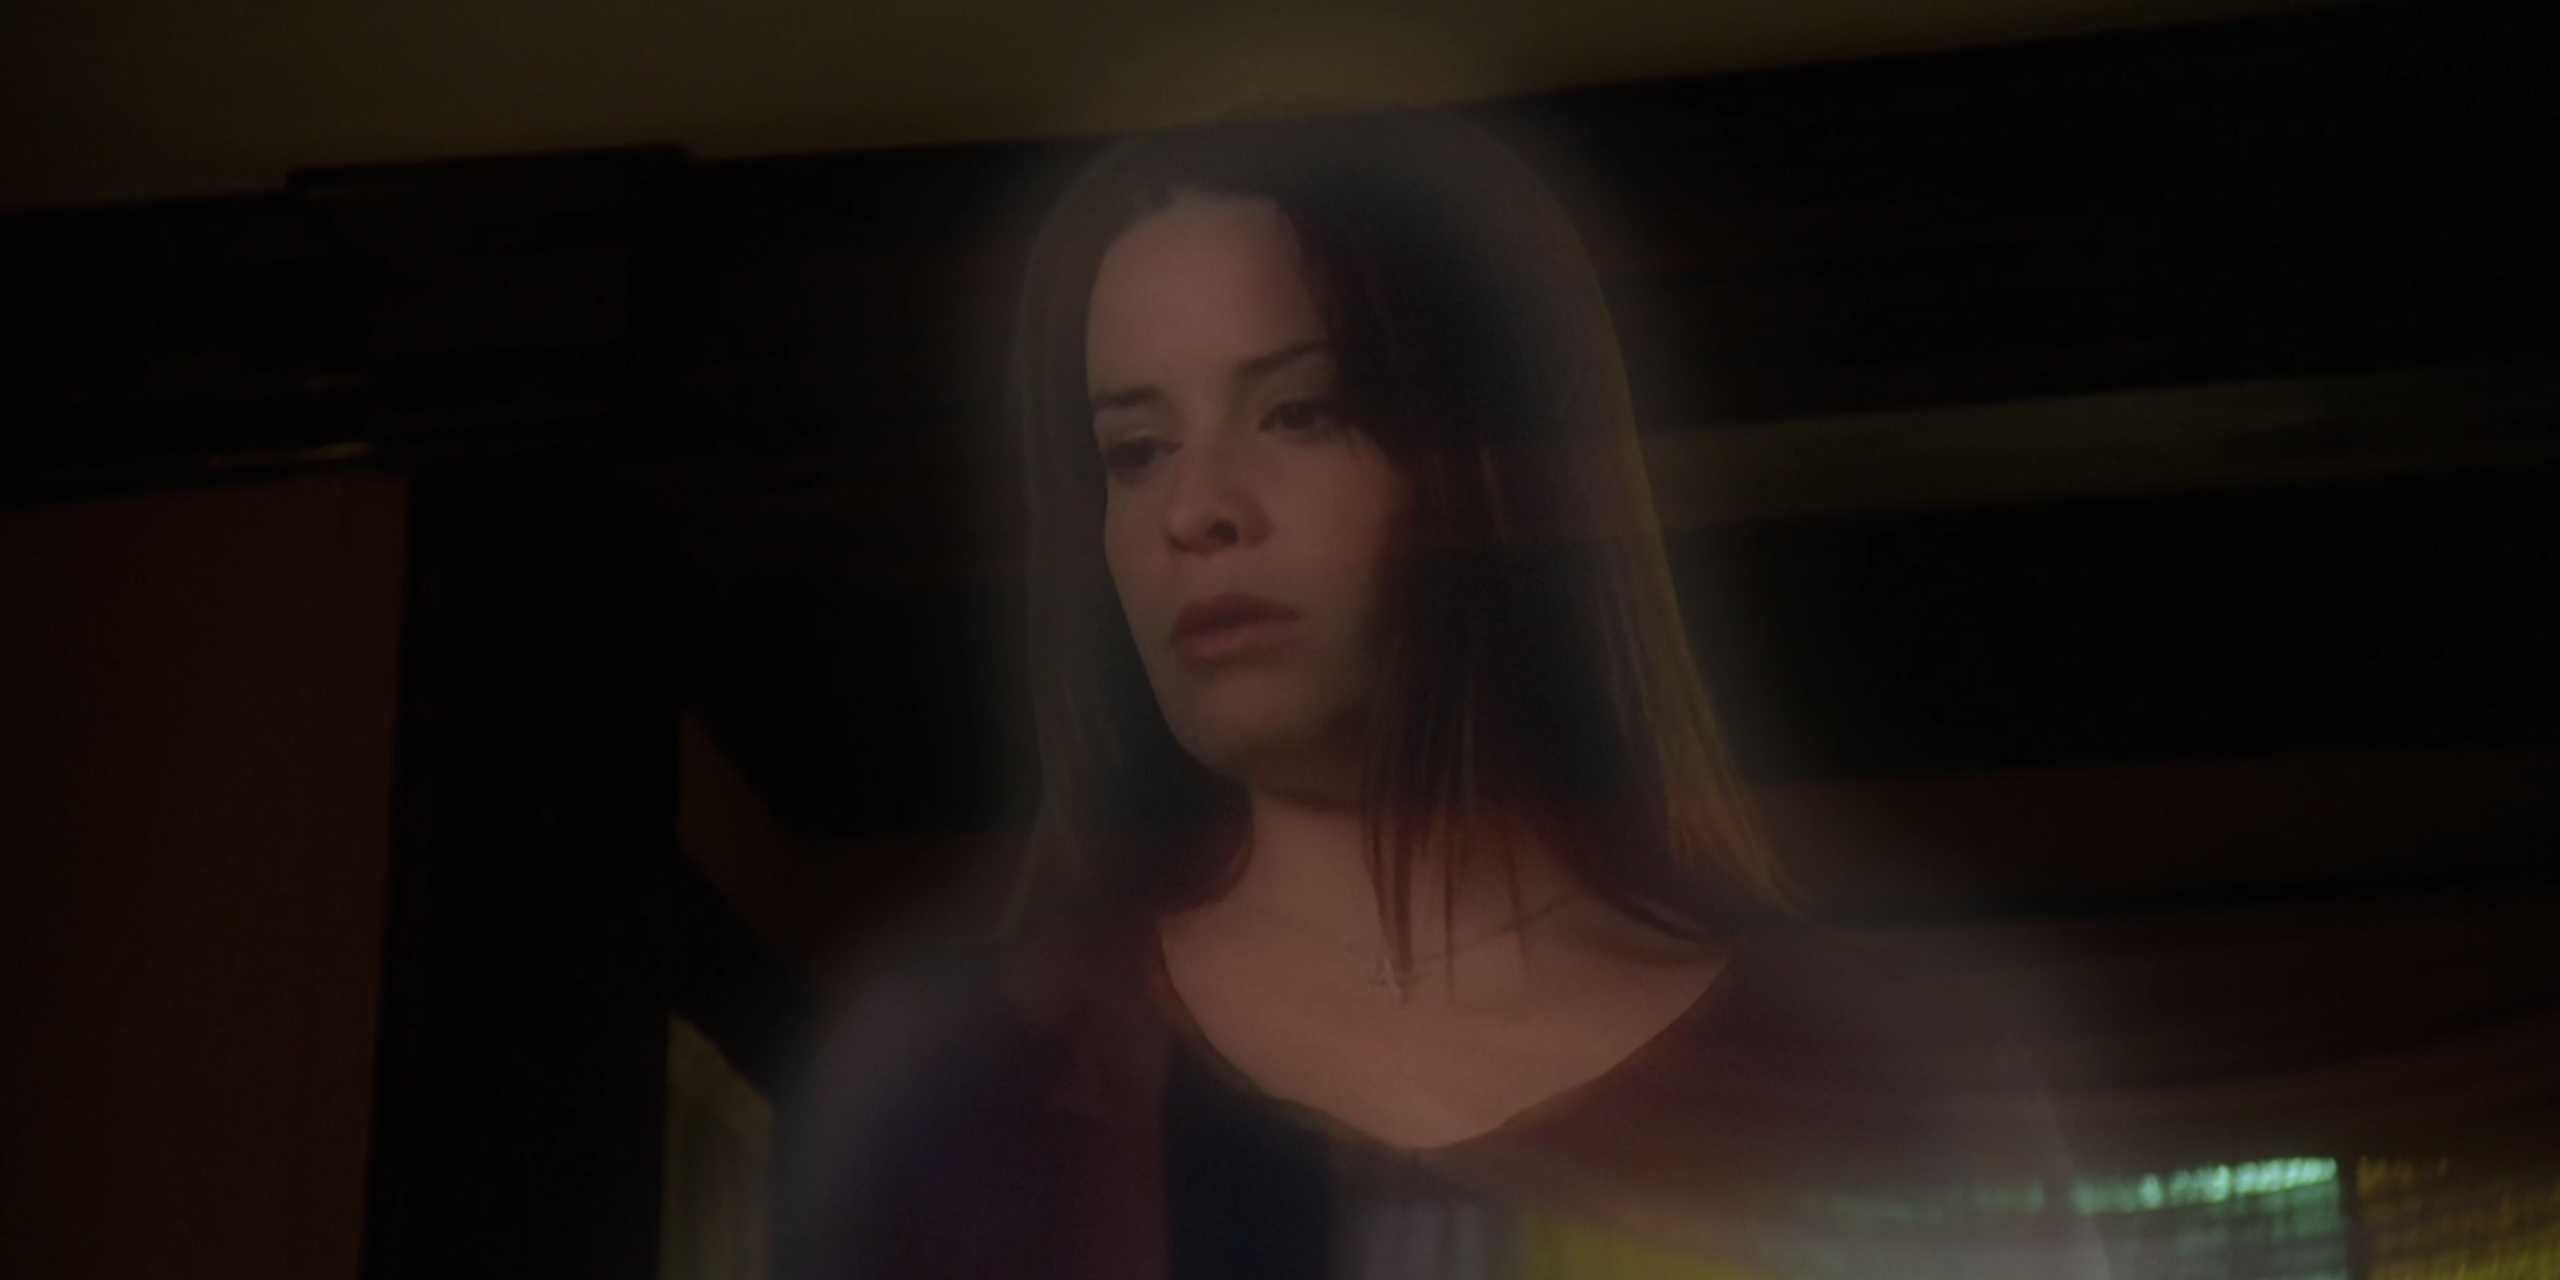 Piper looks down at Charmed's body in concern